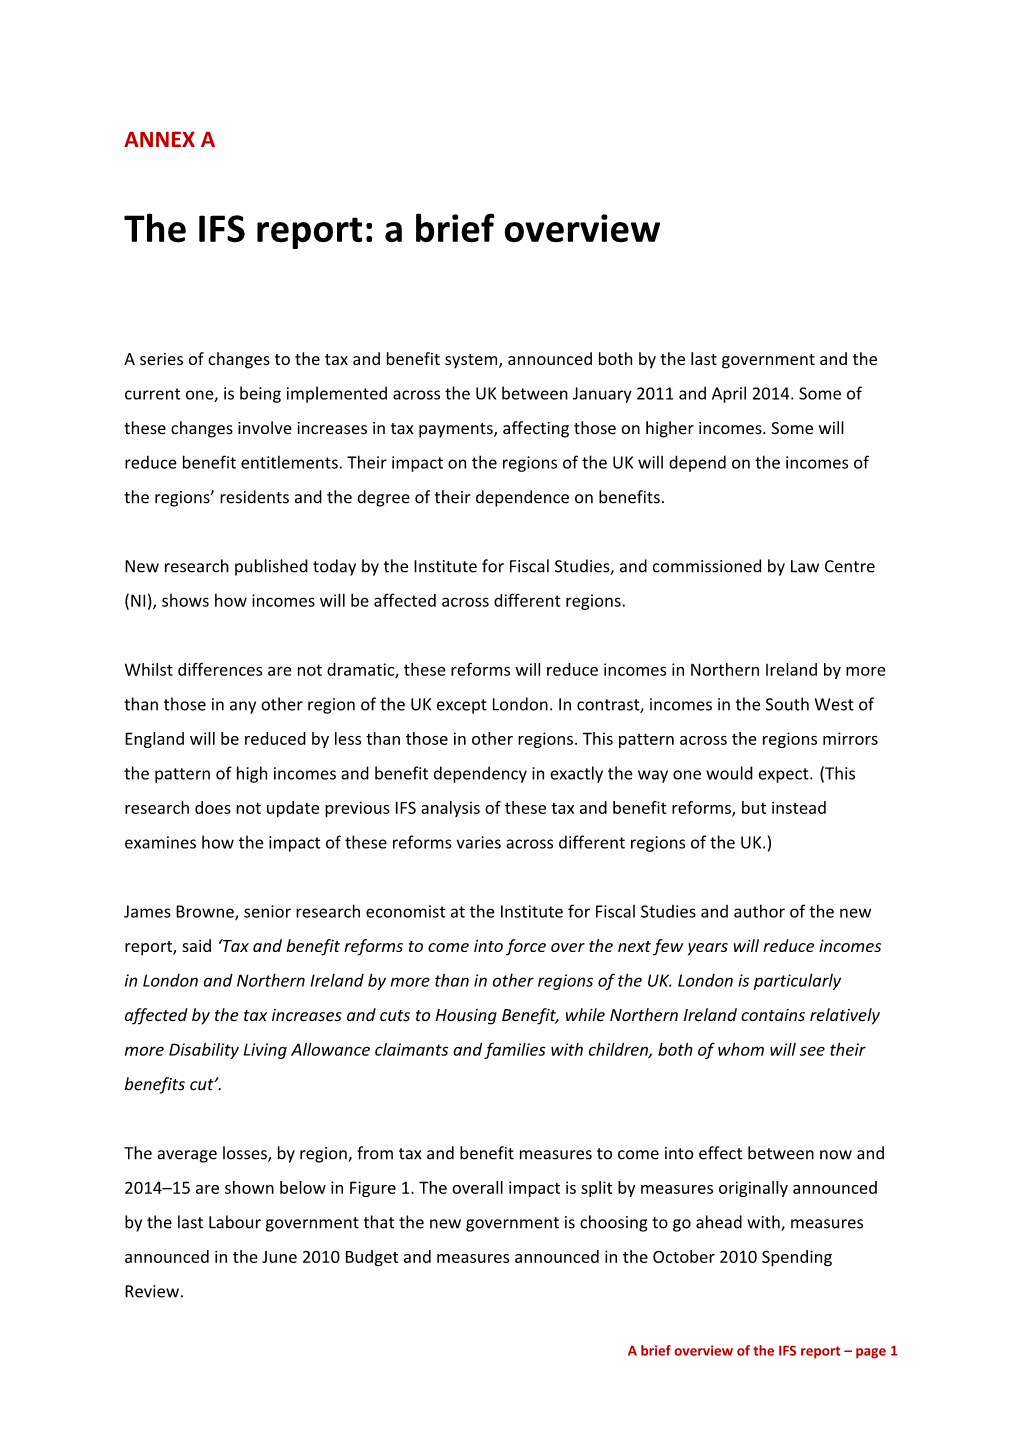 The IFS Report: a Brief Overview